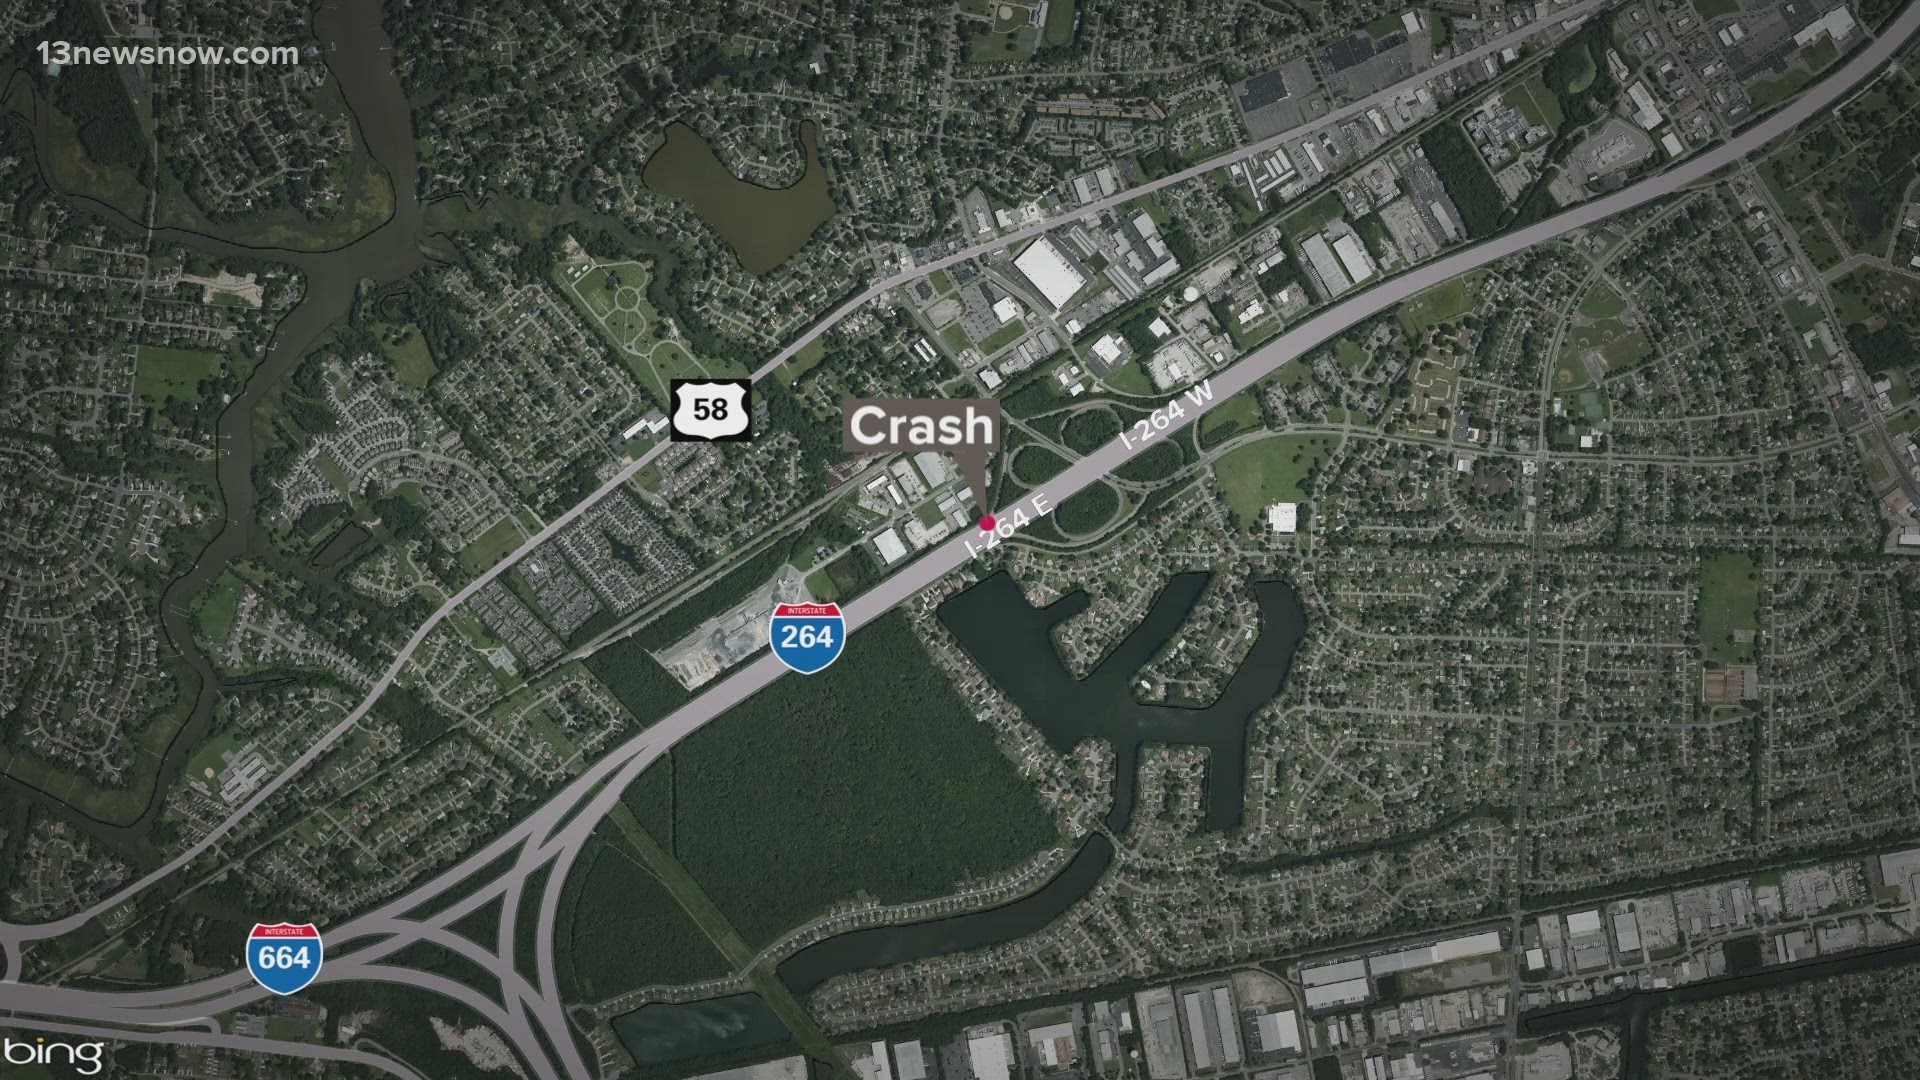 The driver who caused the crash died at the scene in Portsmouth. The other driver, a 34-year-old man from Virginia Beach, was taken to Portsmouth Naval Hospital.